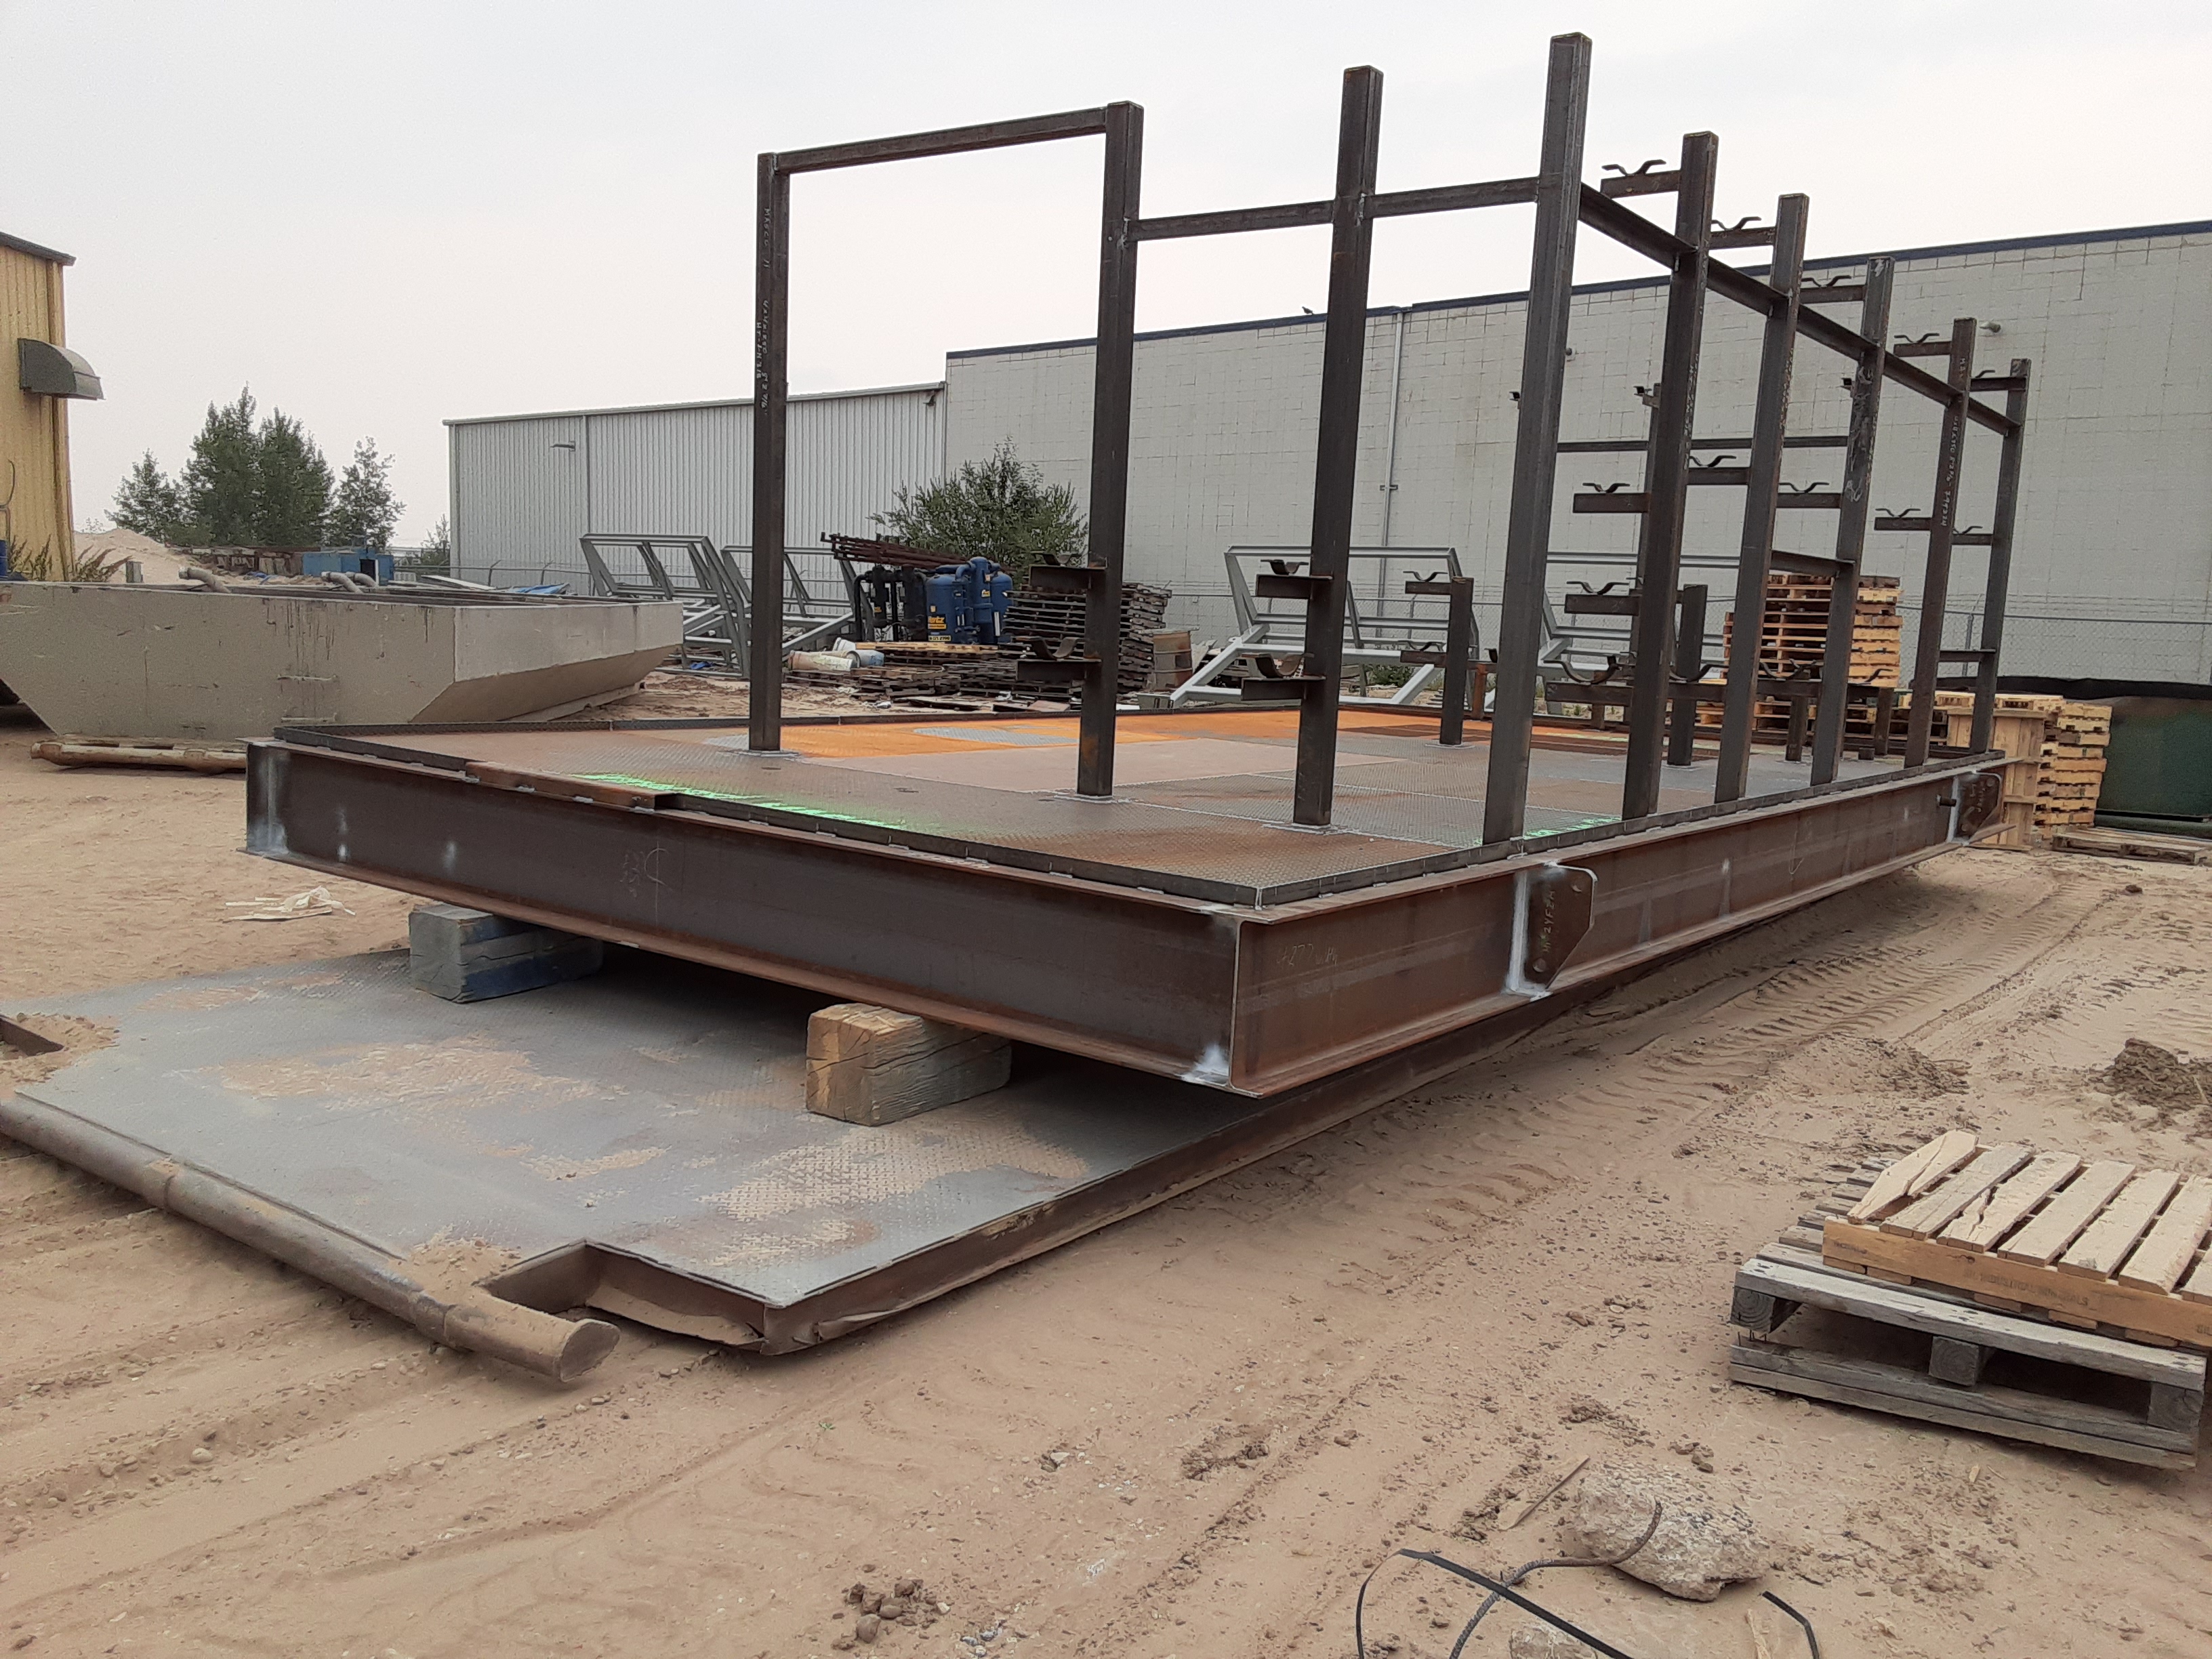 A Steel building ready for blasting